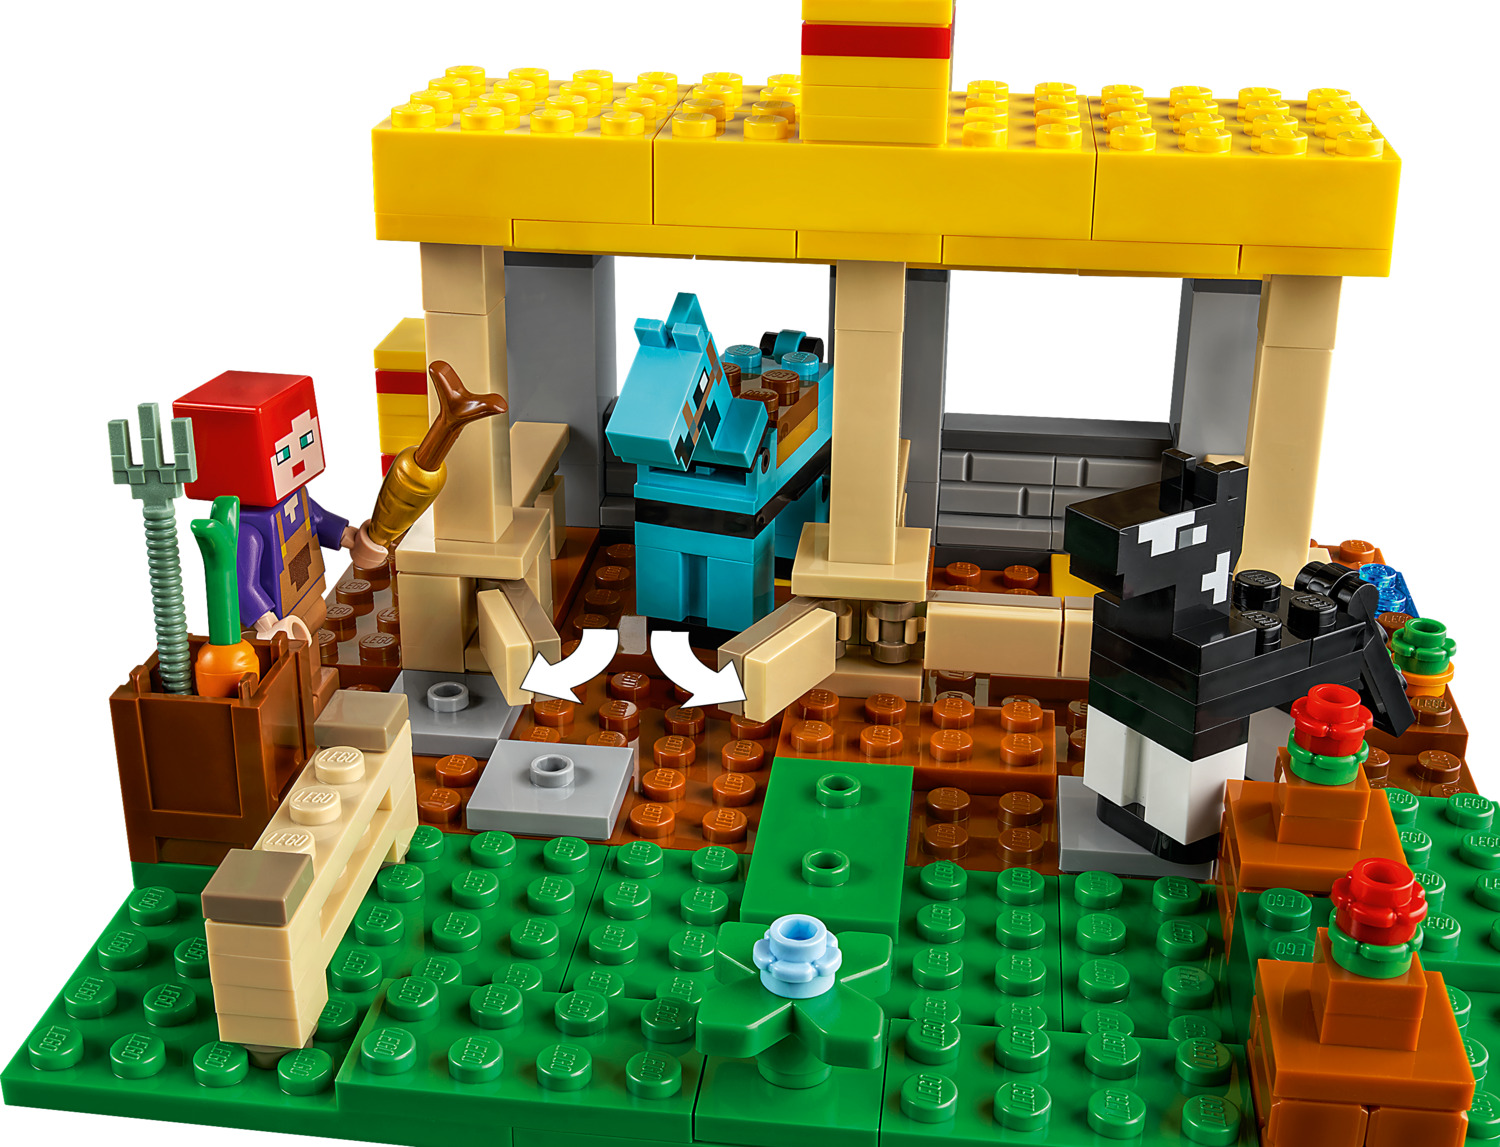 LEGO Minecraft: The Stable - Toy Box Hanover